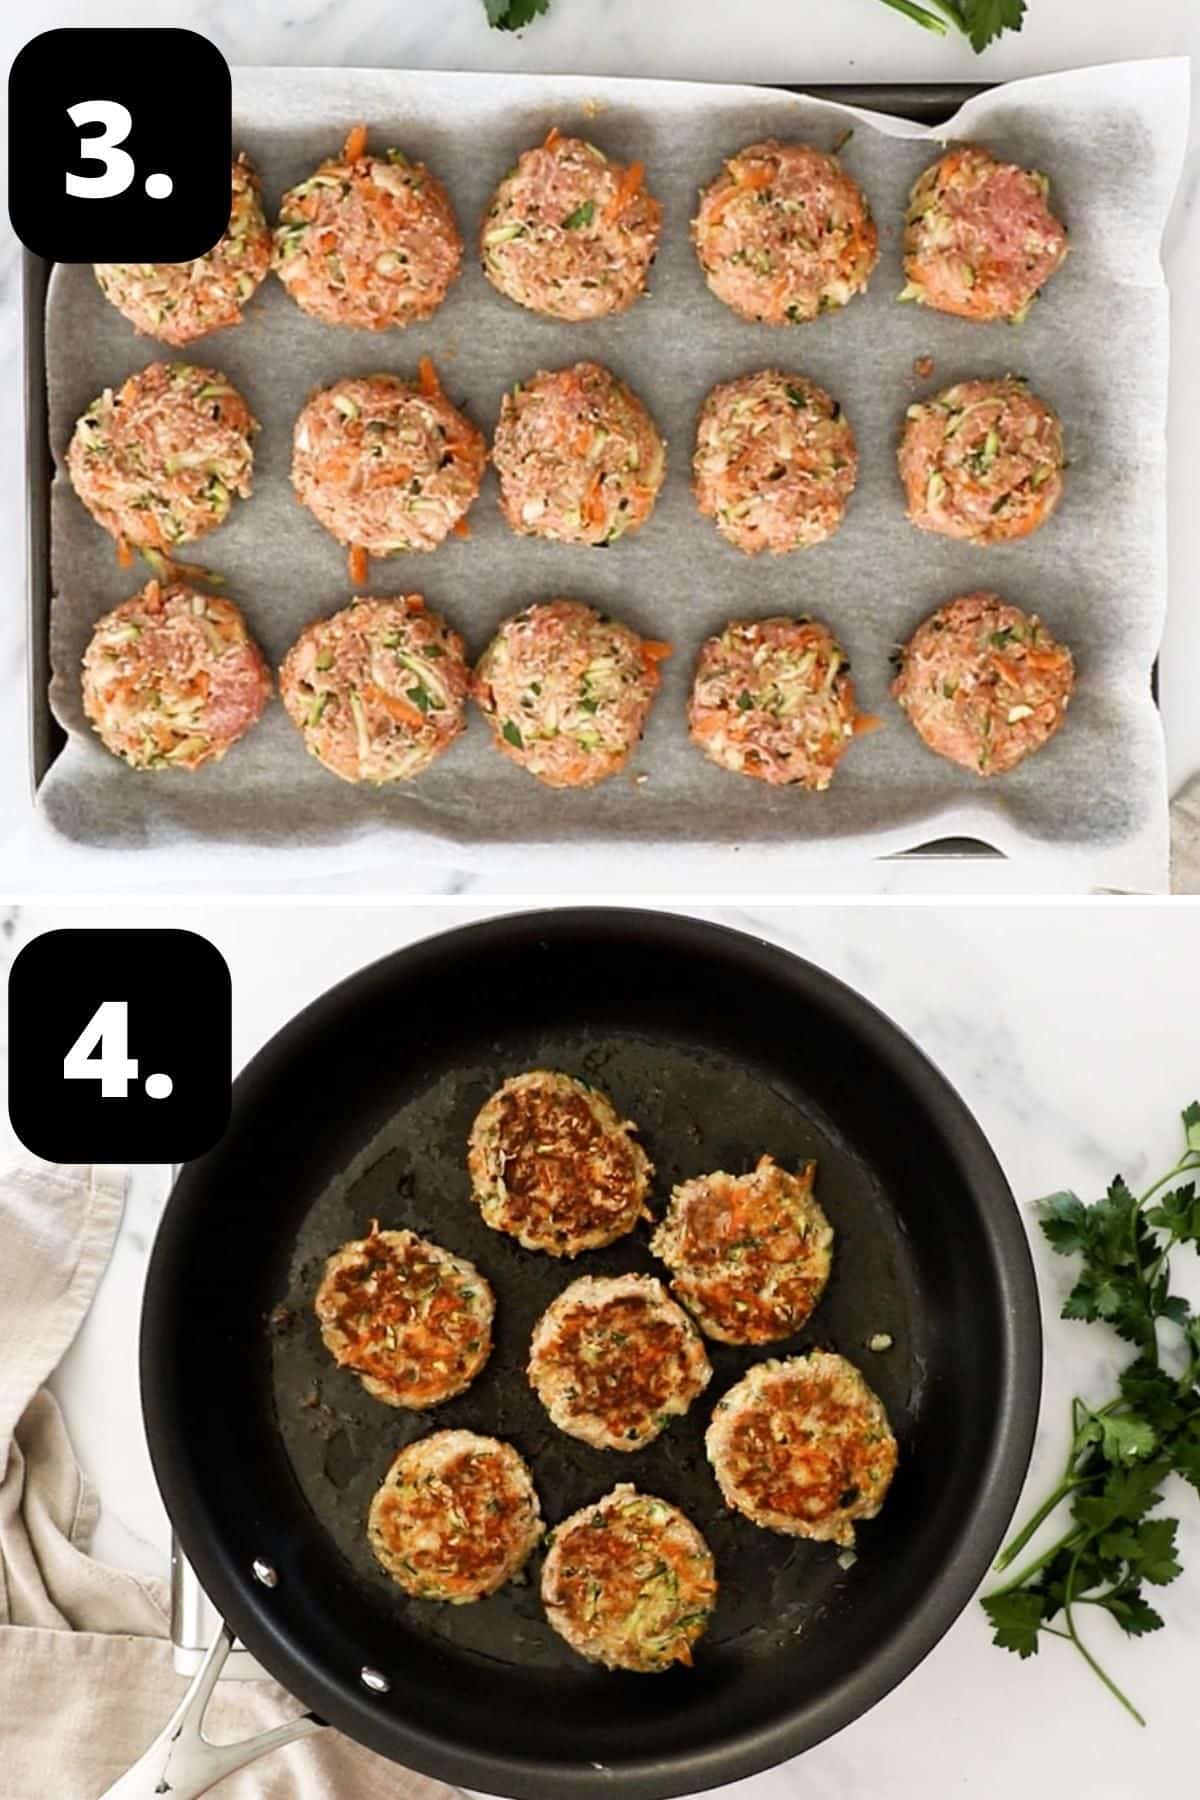 Steps 3-4 of preparing this recipe: the shaped patties on a baking tray and cooking a batch of patties in a frying pan.